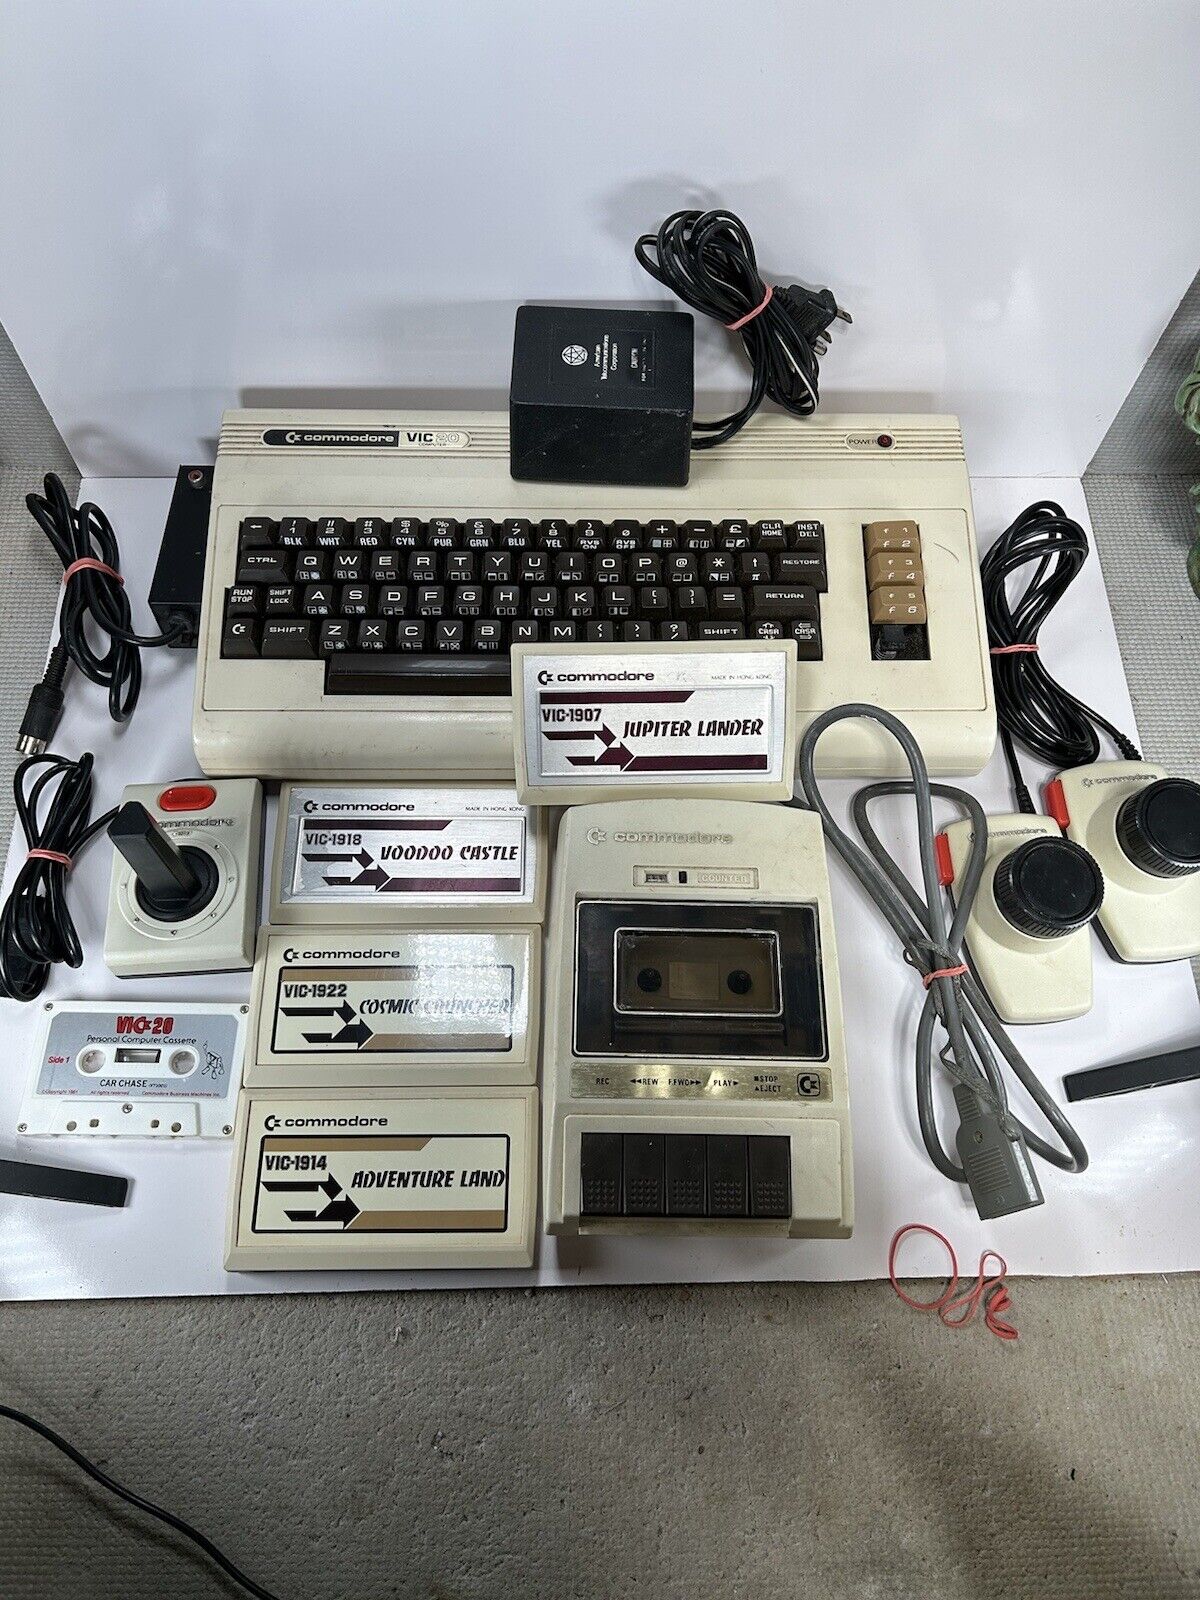 Commodore VIC-20 Computer Lot w/ C2N Cassette Player Joystick Controllers Power